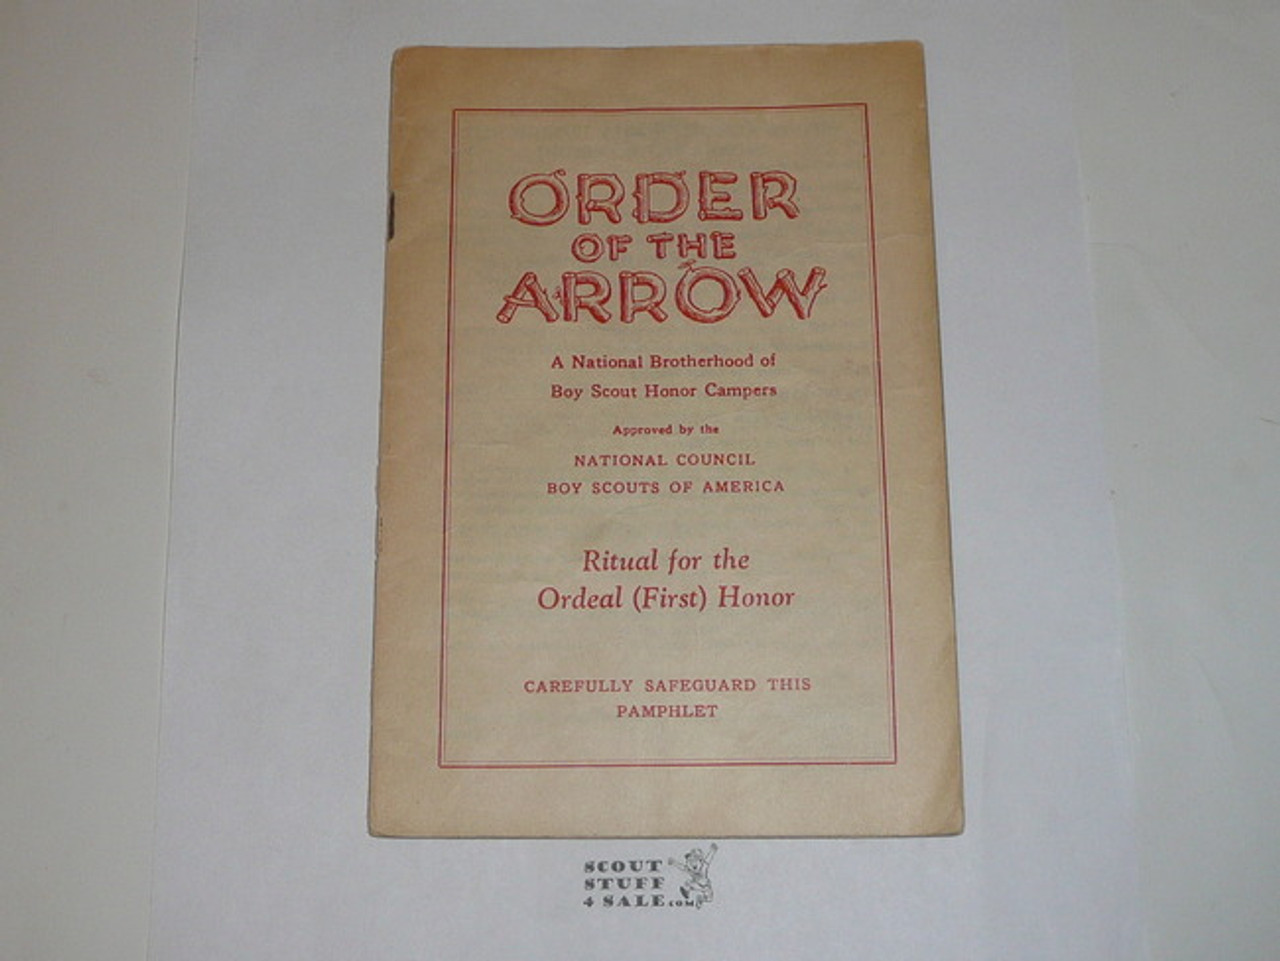 Ordeal Ceremony Manual, Order of the Arrow, 1948, 3-48 Printing